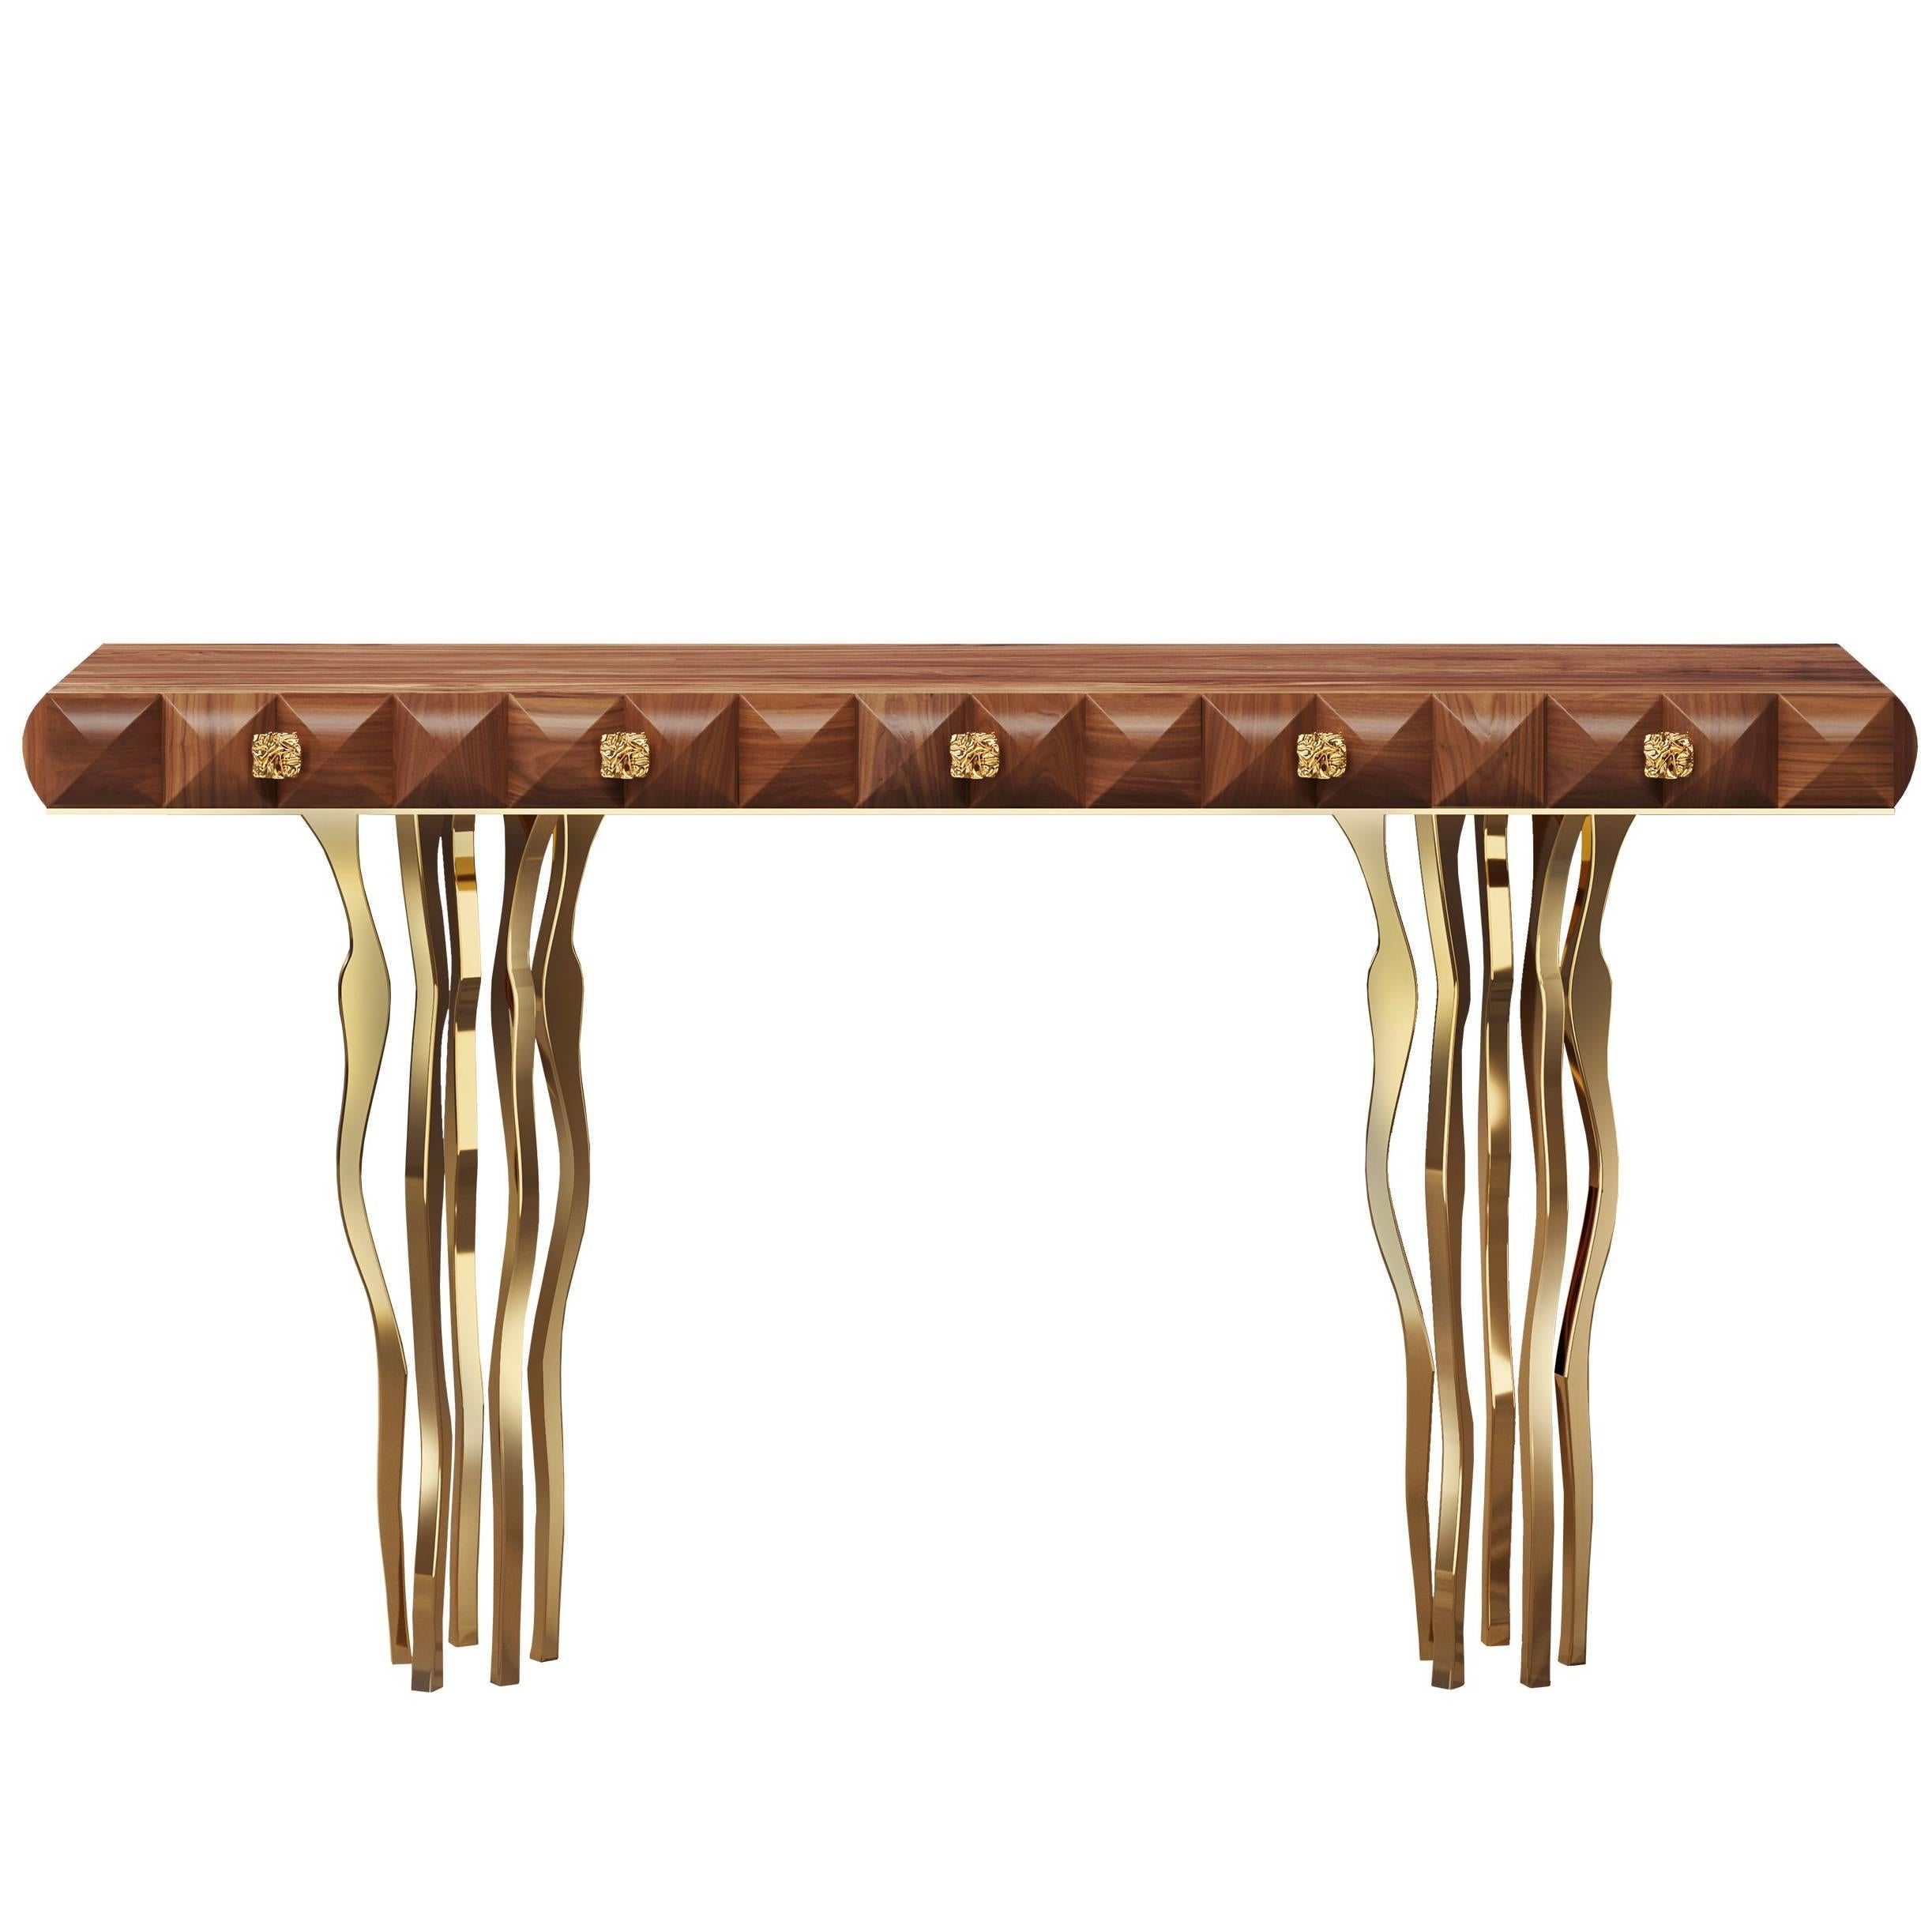 "Il Pezzo 10 Console" solid walnut - polished brass casting base - three drawers For Sale